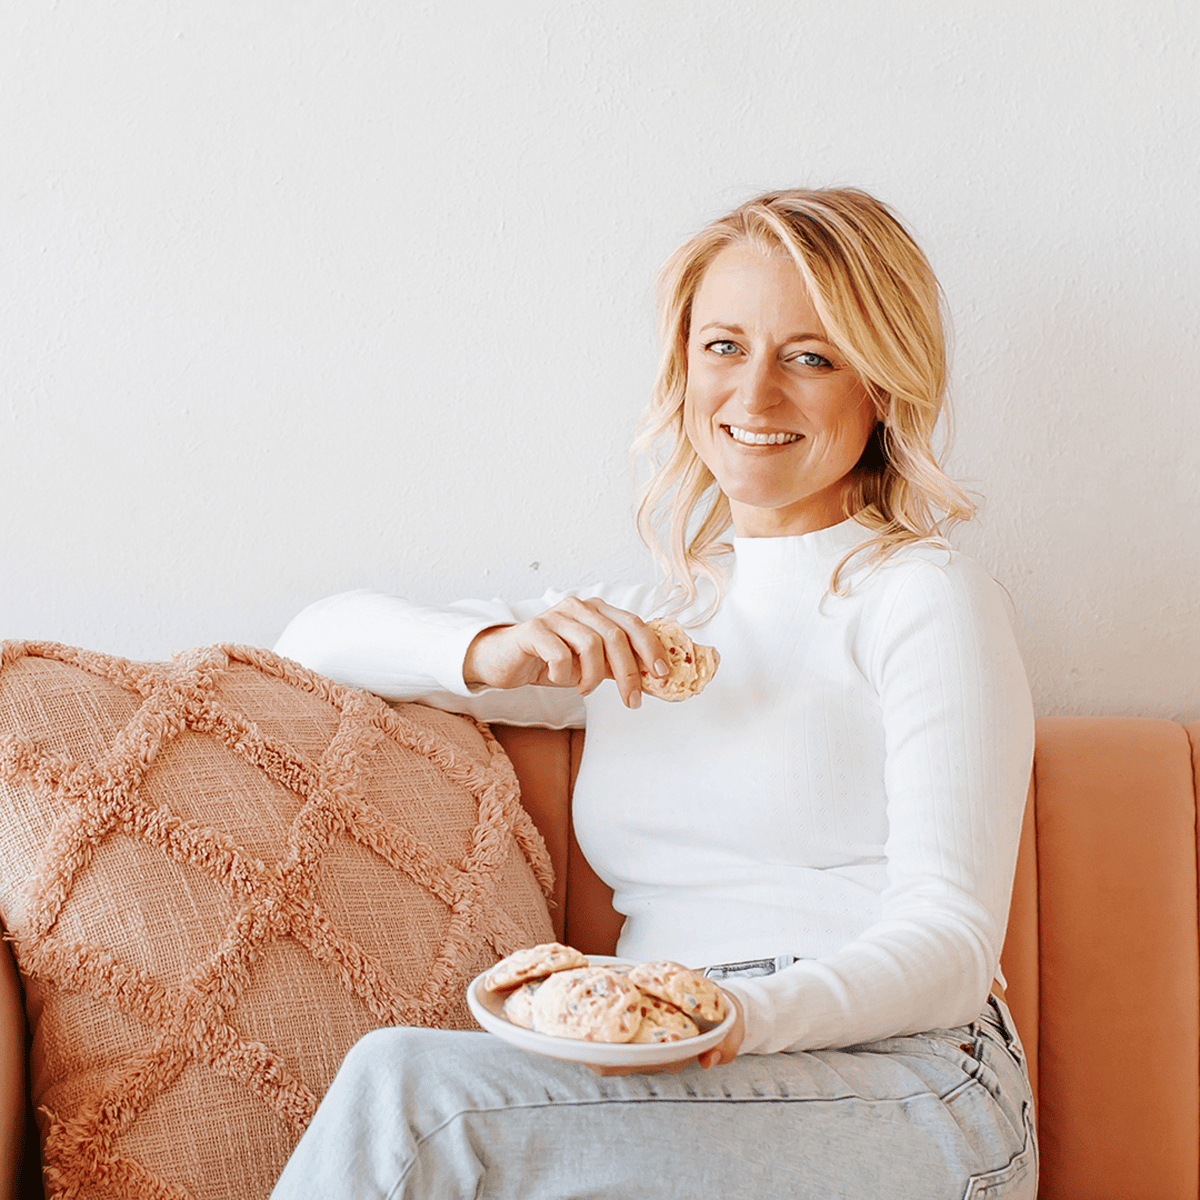 haley williams, blonde woman, holding a cookie and sitting on couch.